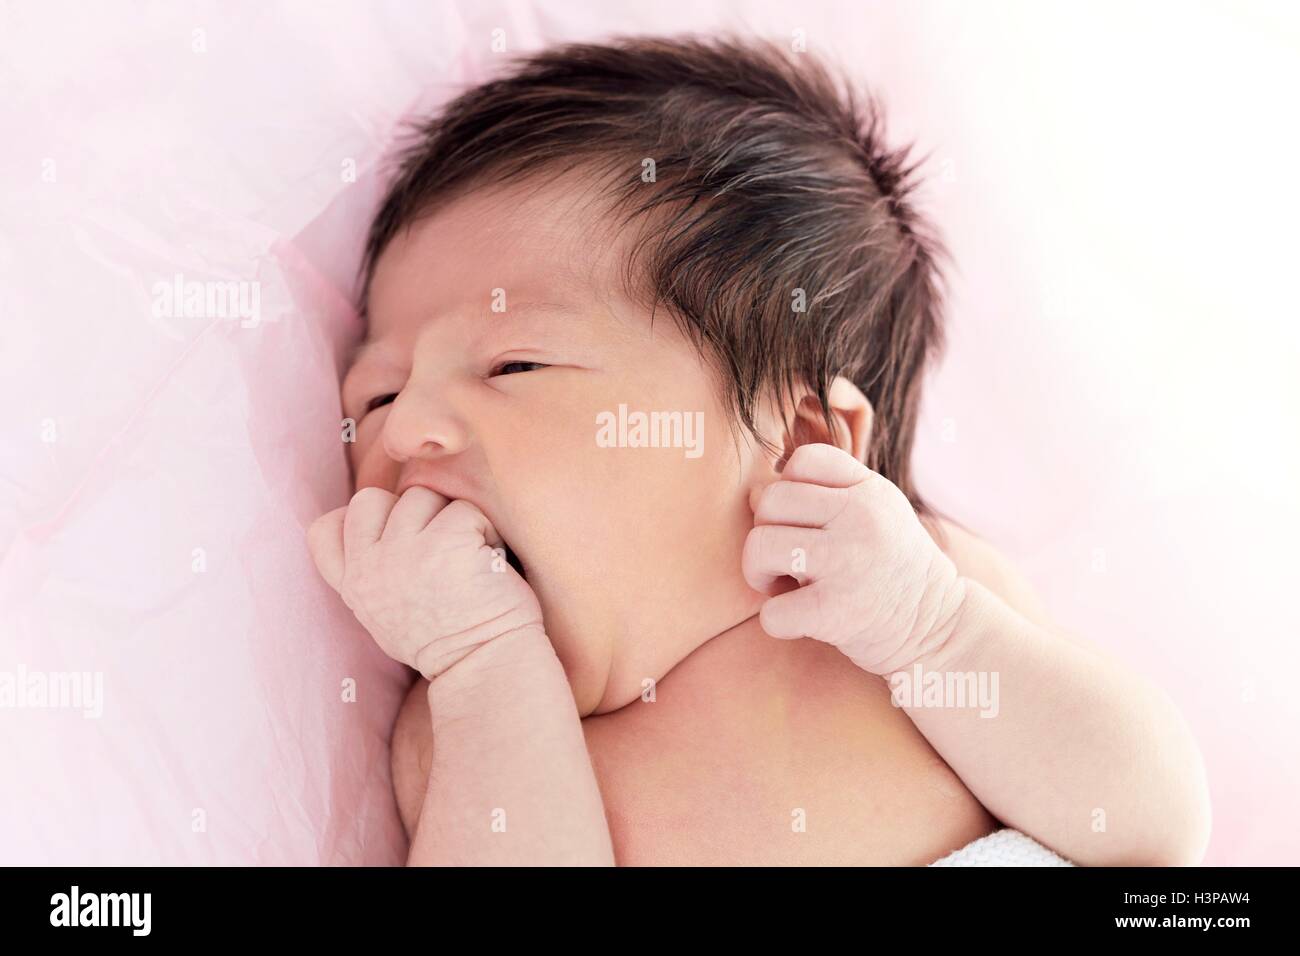 MODEL RELEASED. Newborn baby girl with hand in mouth. Stock Photo